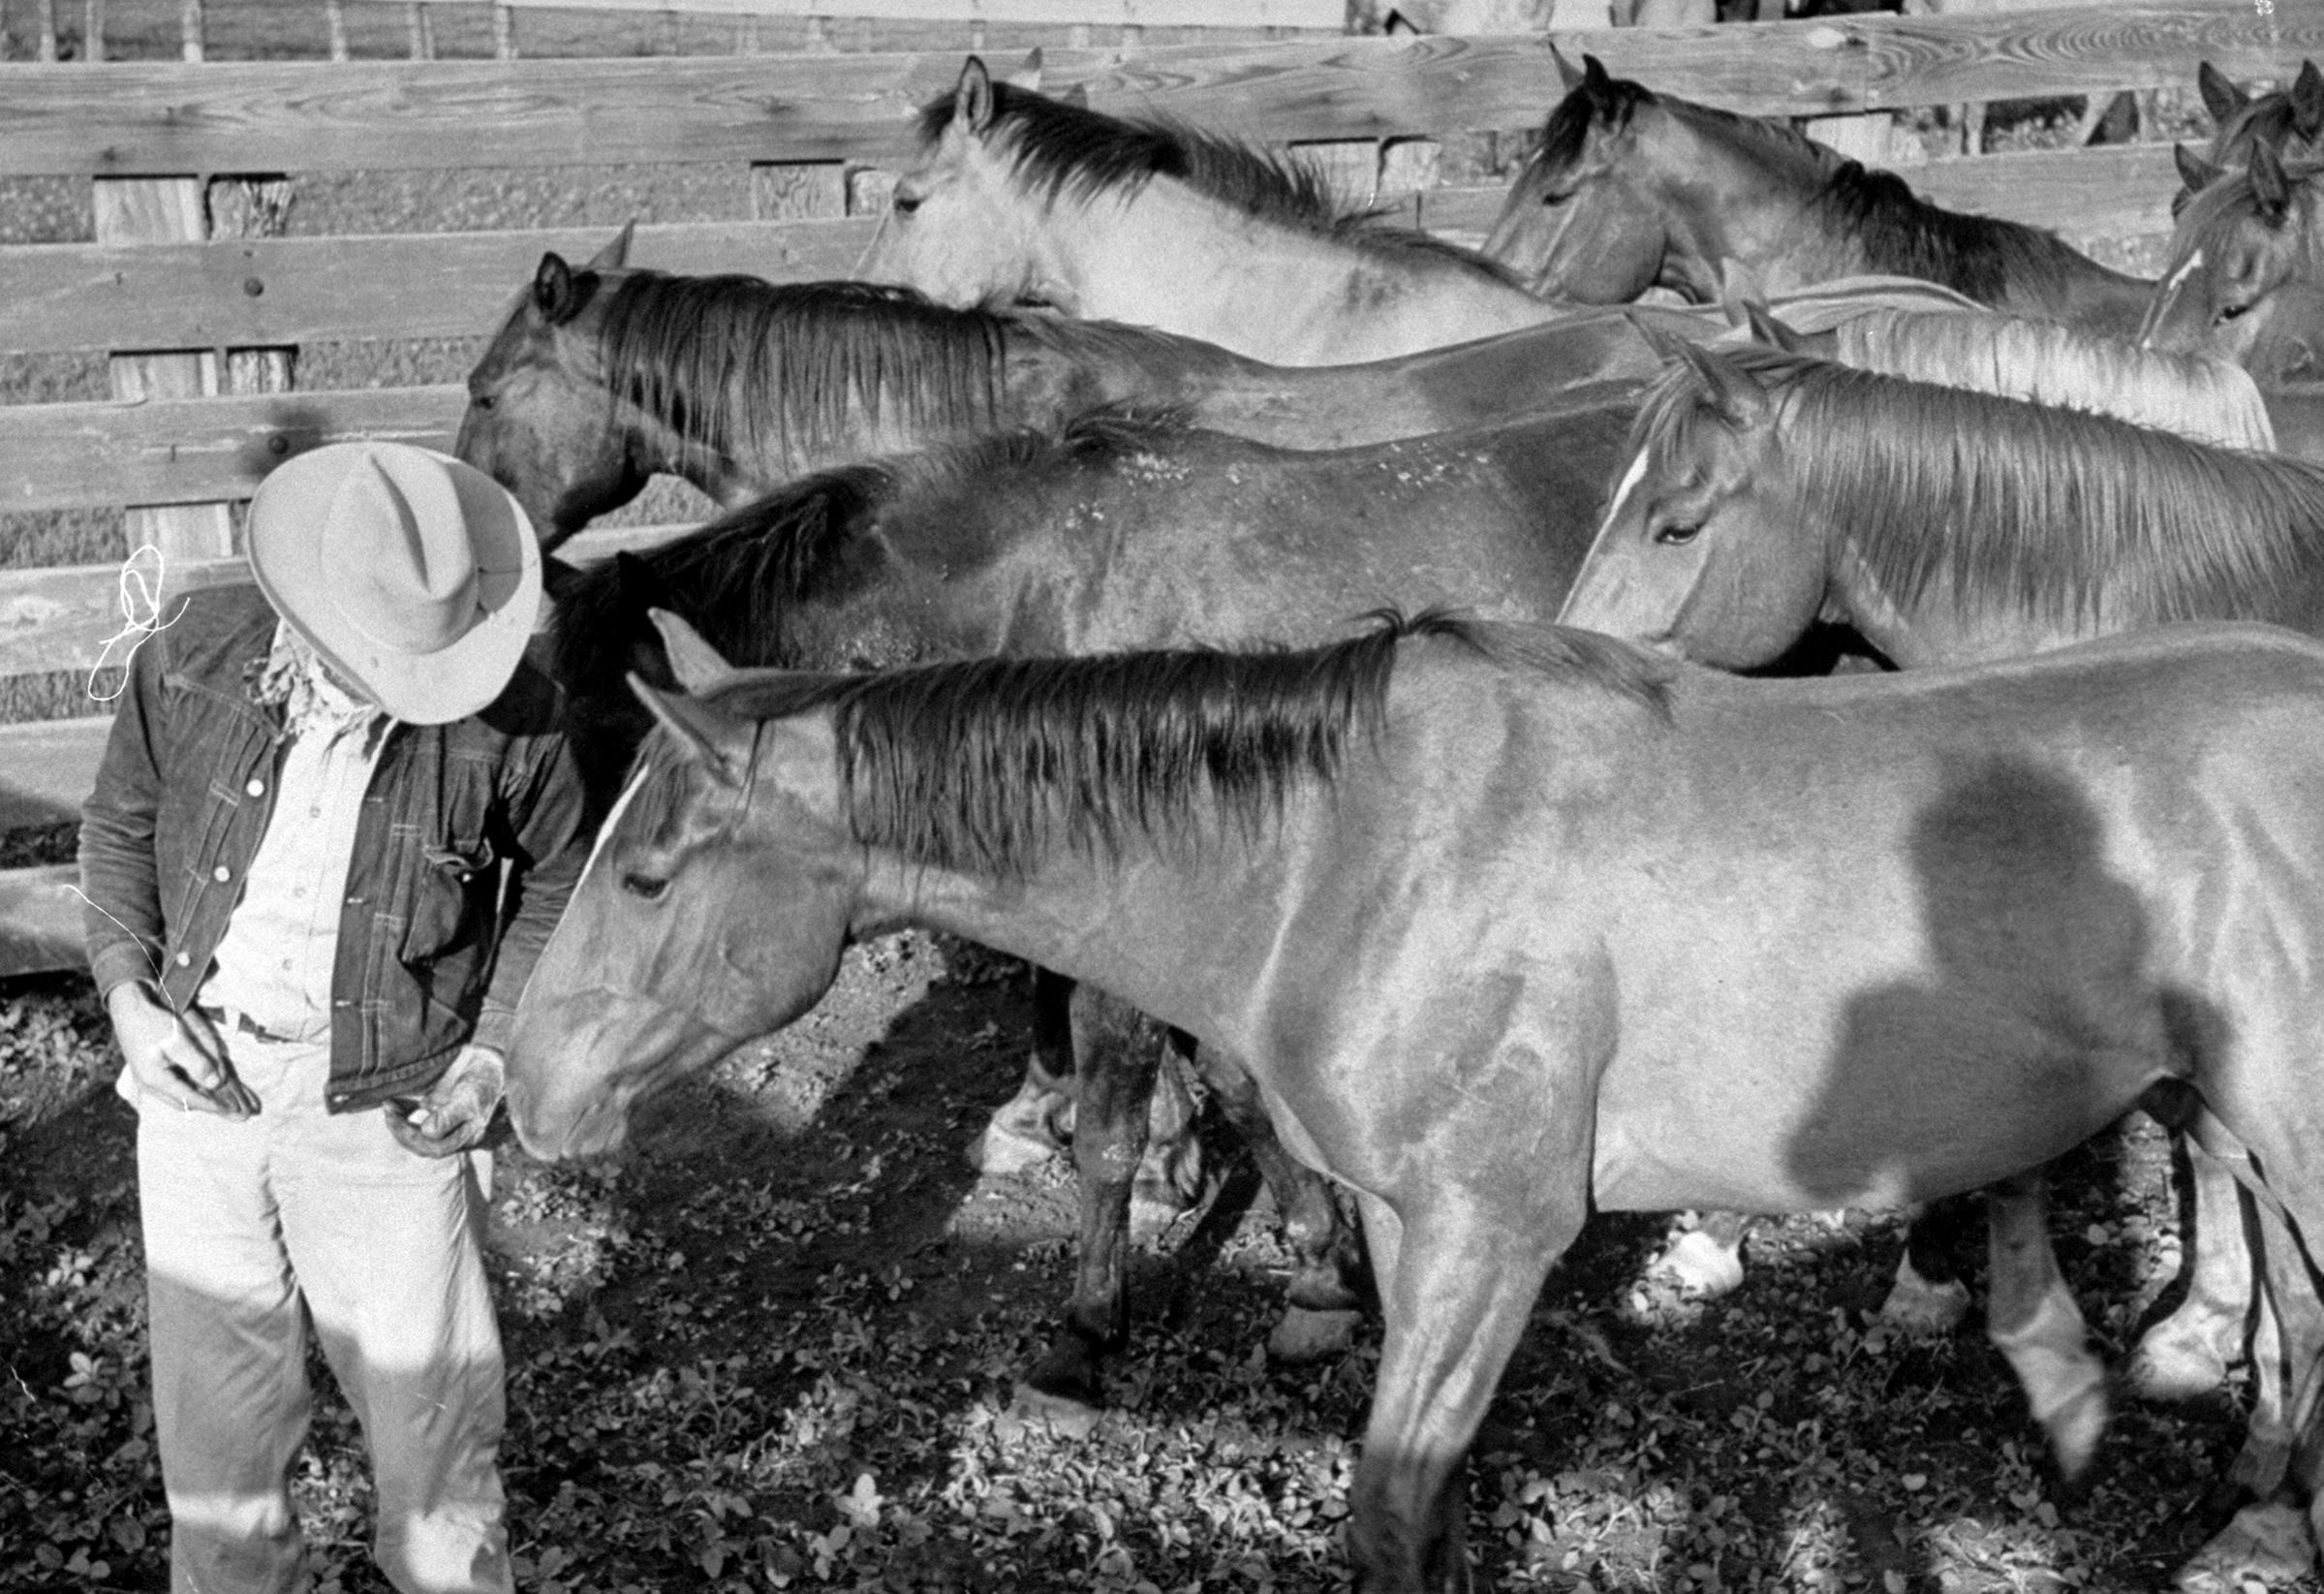 Cowboy Clarence H. Long from the iconic 1949 LIFE magazine cover.